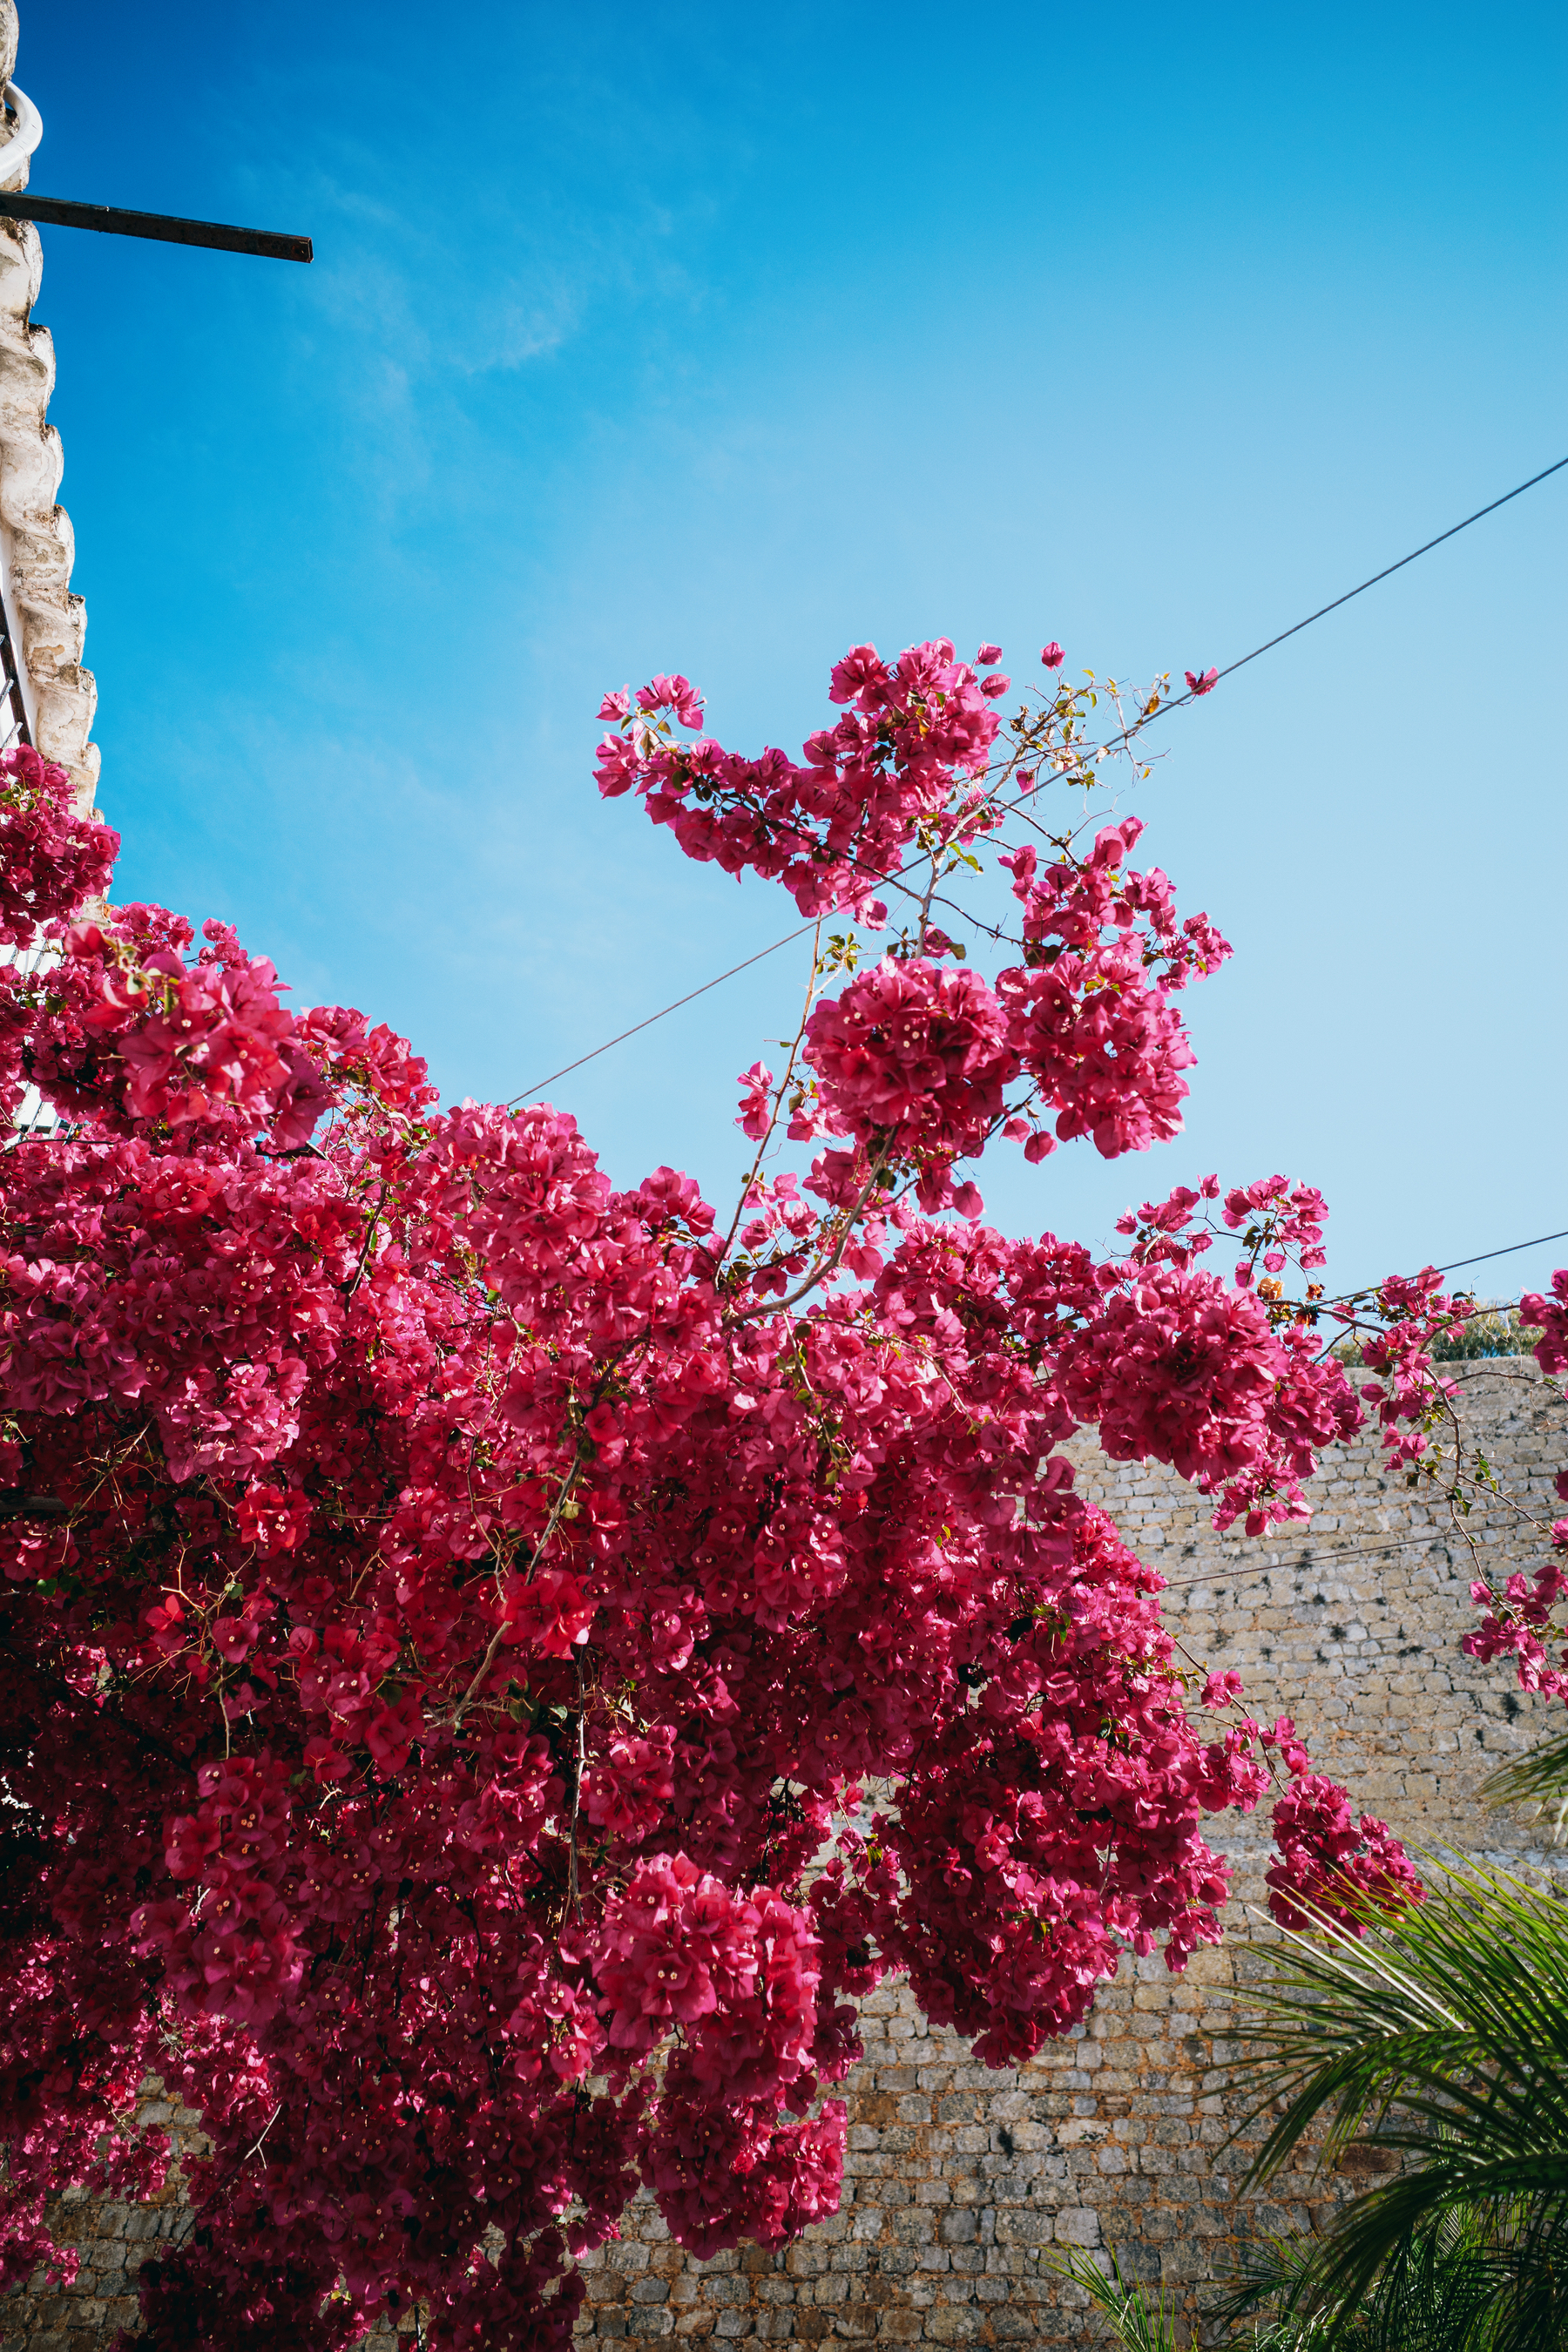 A vibrant bougainvillea plant with clusters of bright pink flowers is set against a backdrop of a clear blue sky and a stone wall.